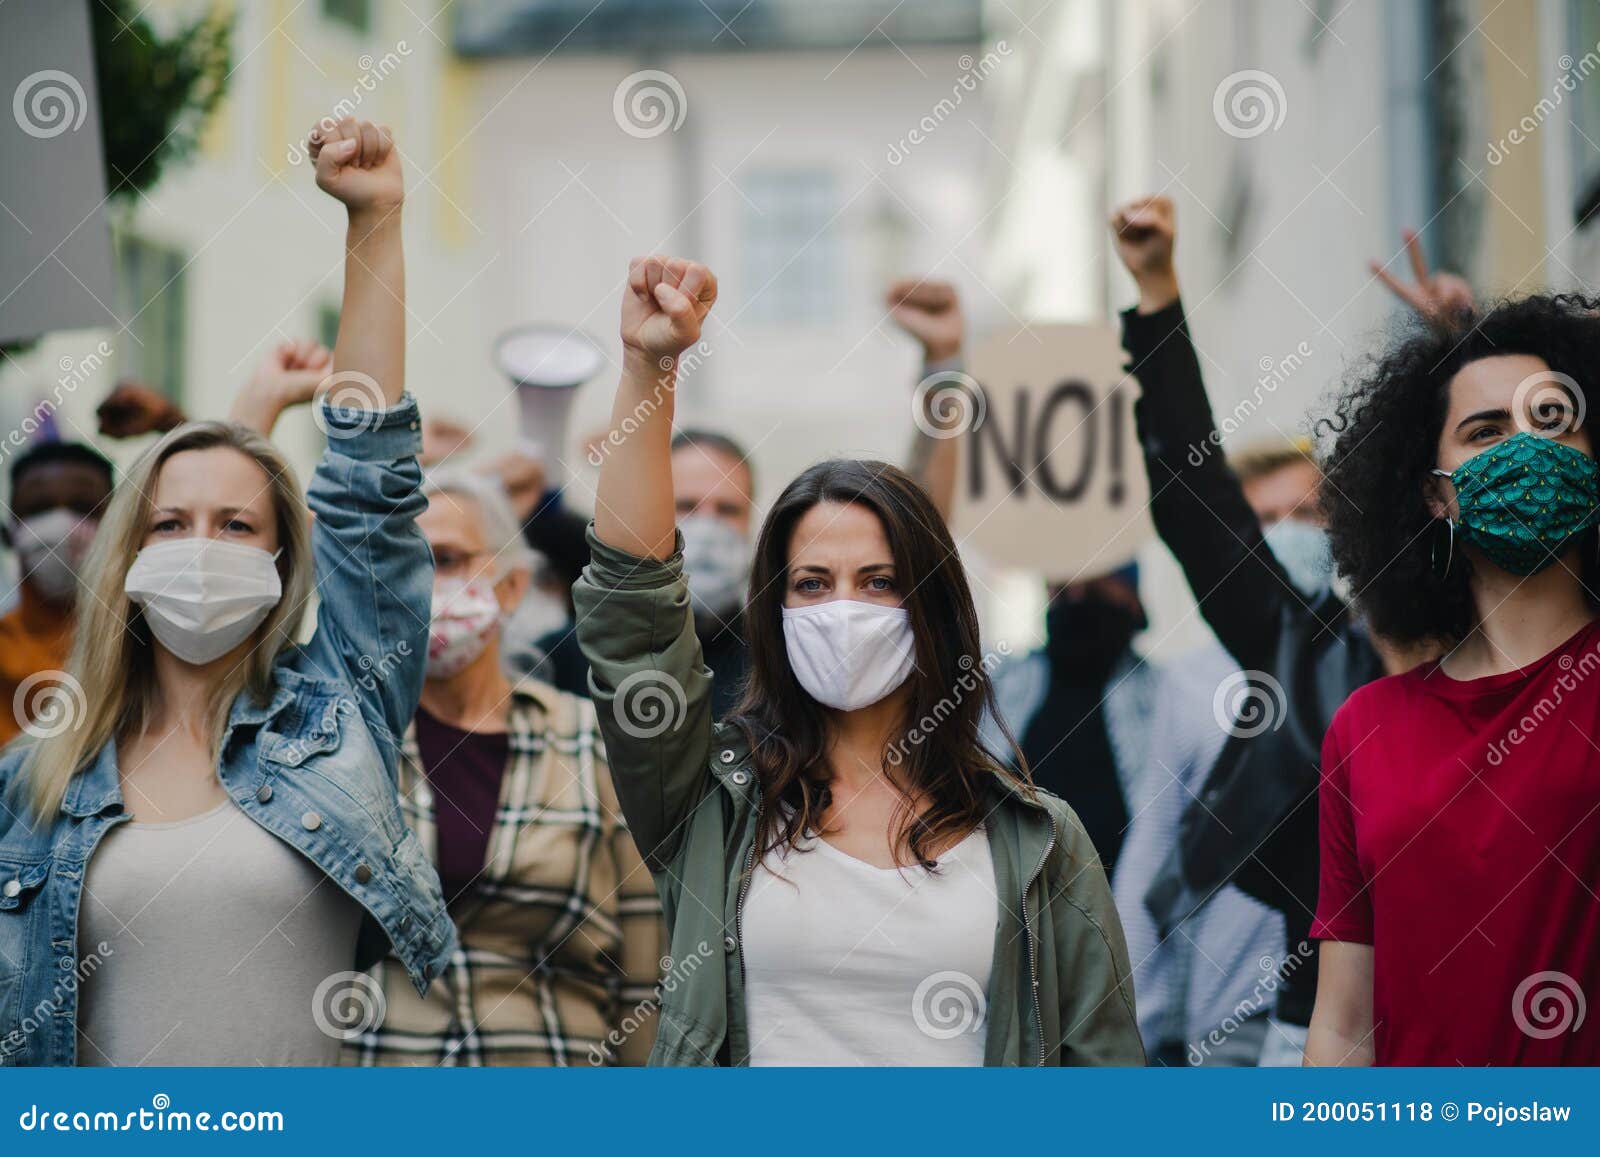 group of people activists protesting on streets, women march and demonstration concept.